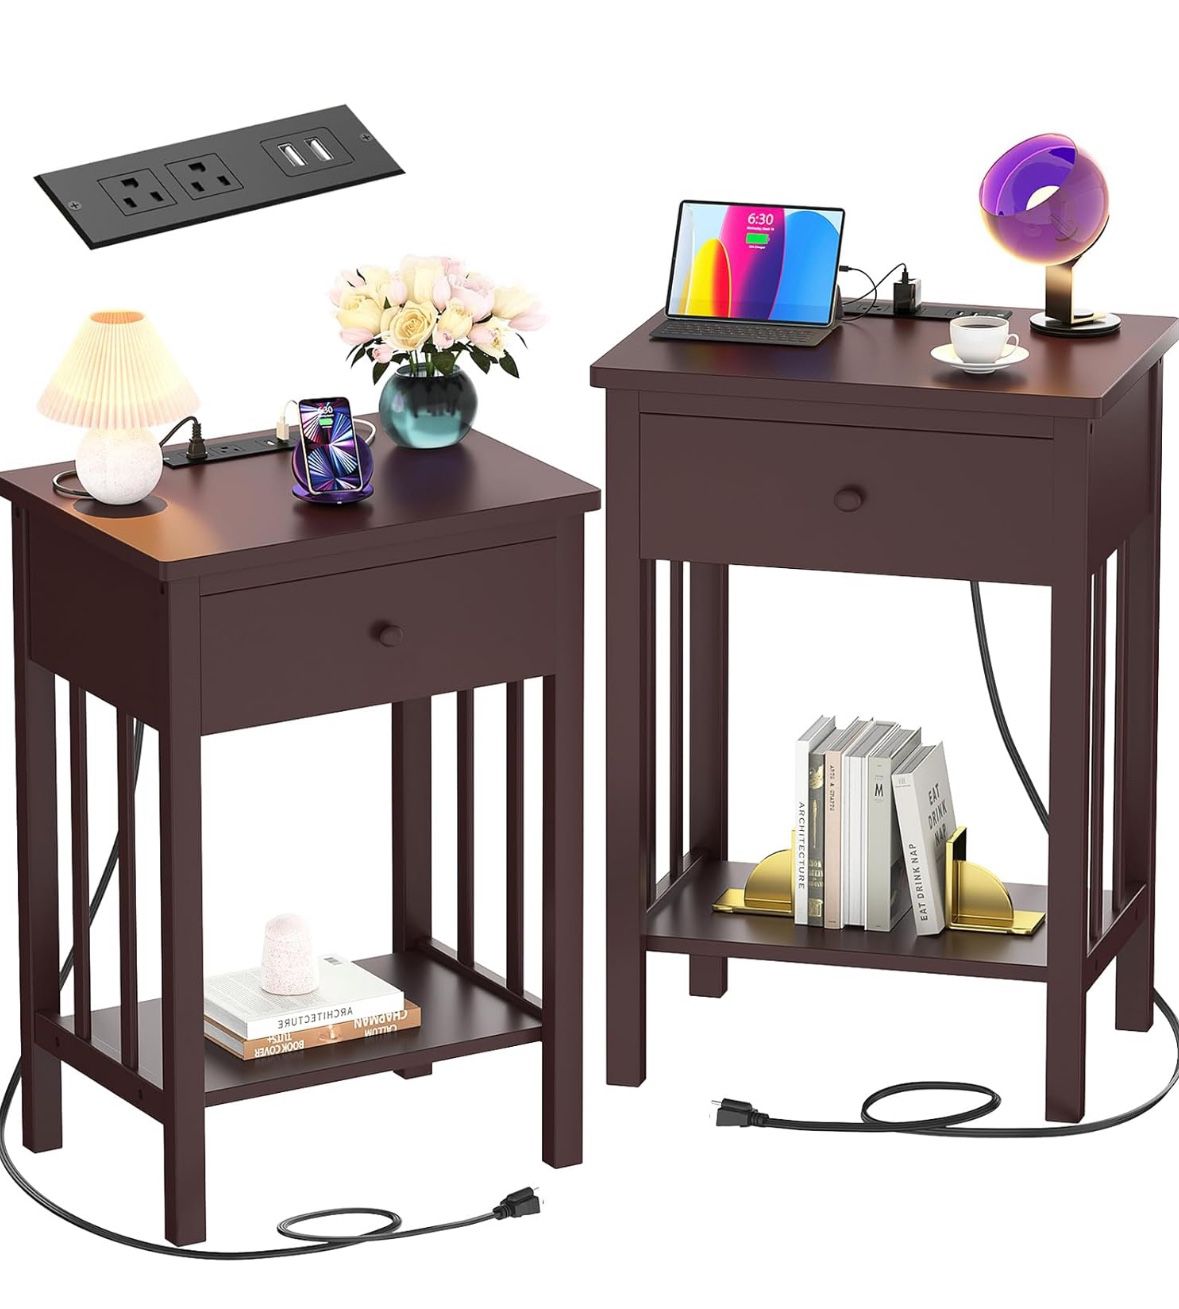 Homykic Nightstand with Charging Station Set of 2, Bamboo Bedside Table Set with USB Ports and Outlets, Night Stand End Table with Drawer for Bedroom,